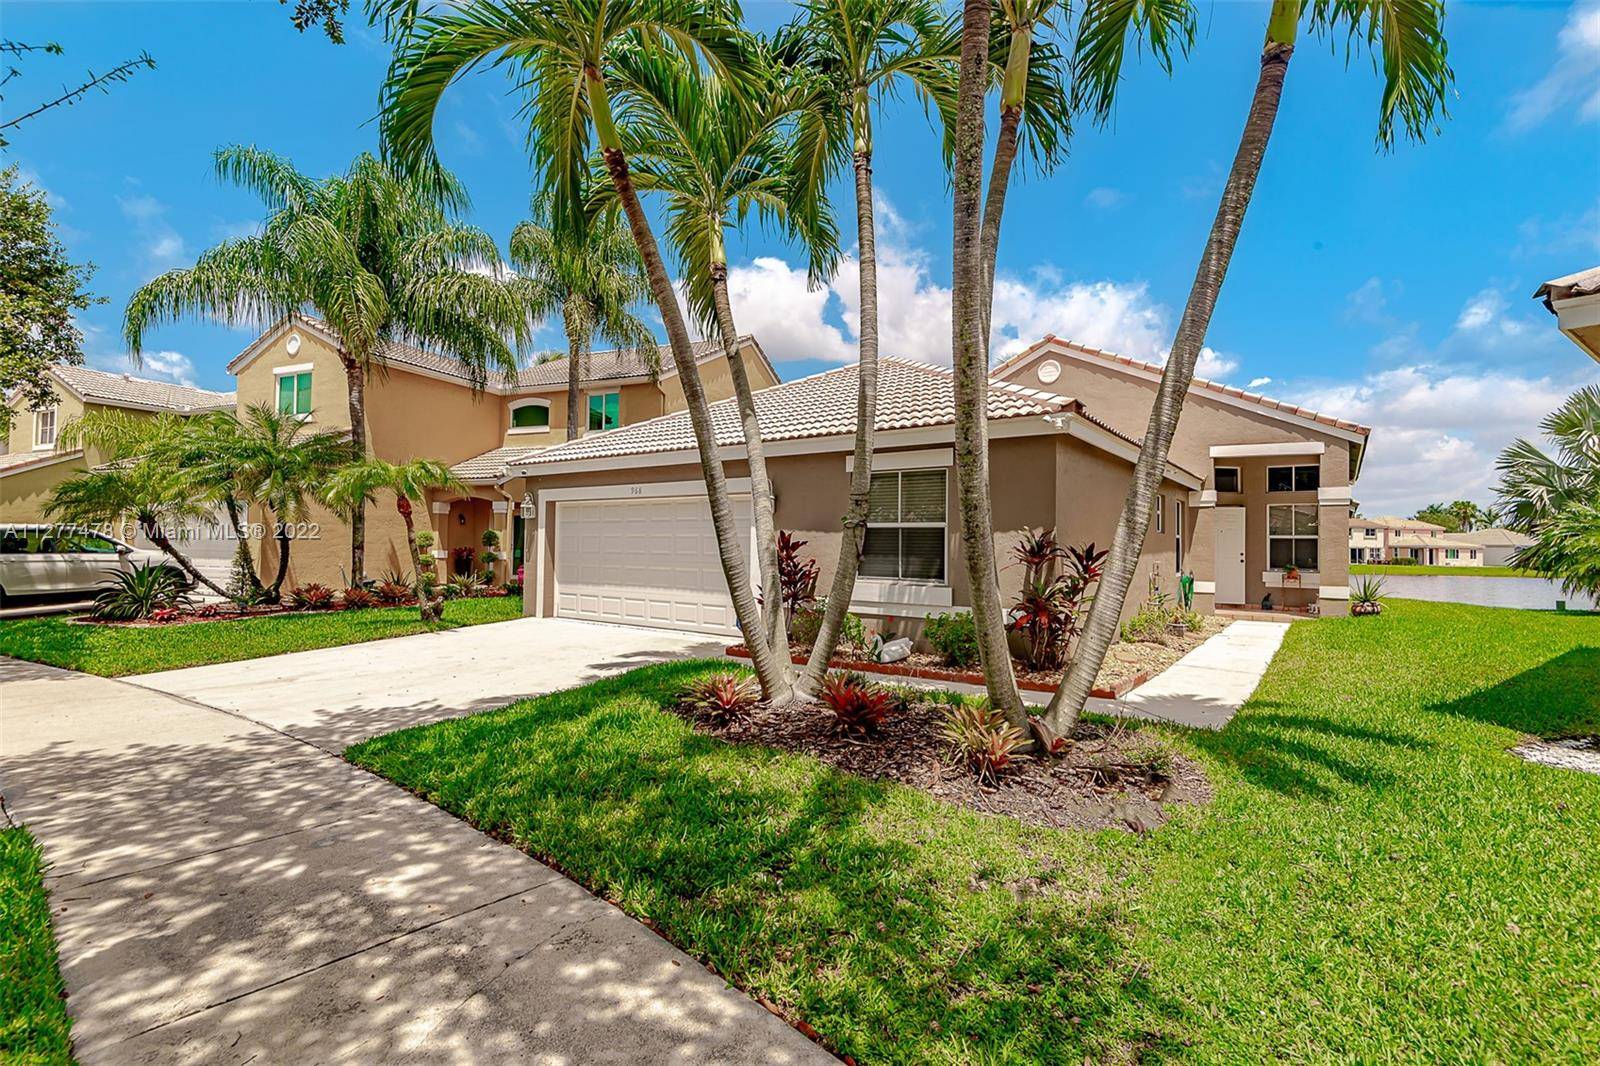 Beautiful Home in one of the most wanted neighborhoods of Weston, The Falls.